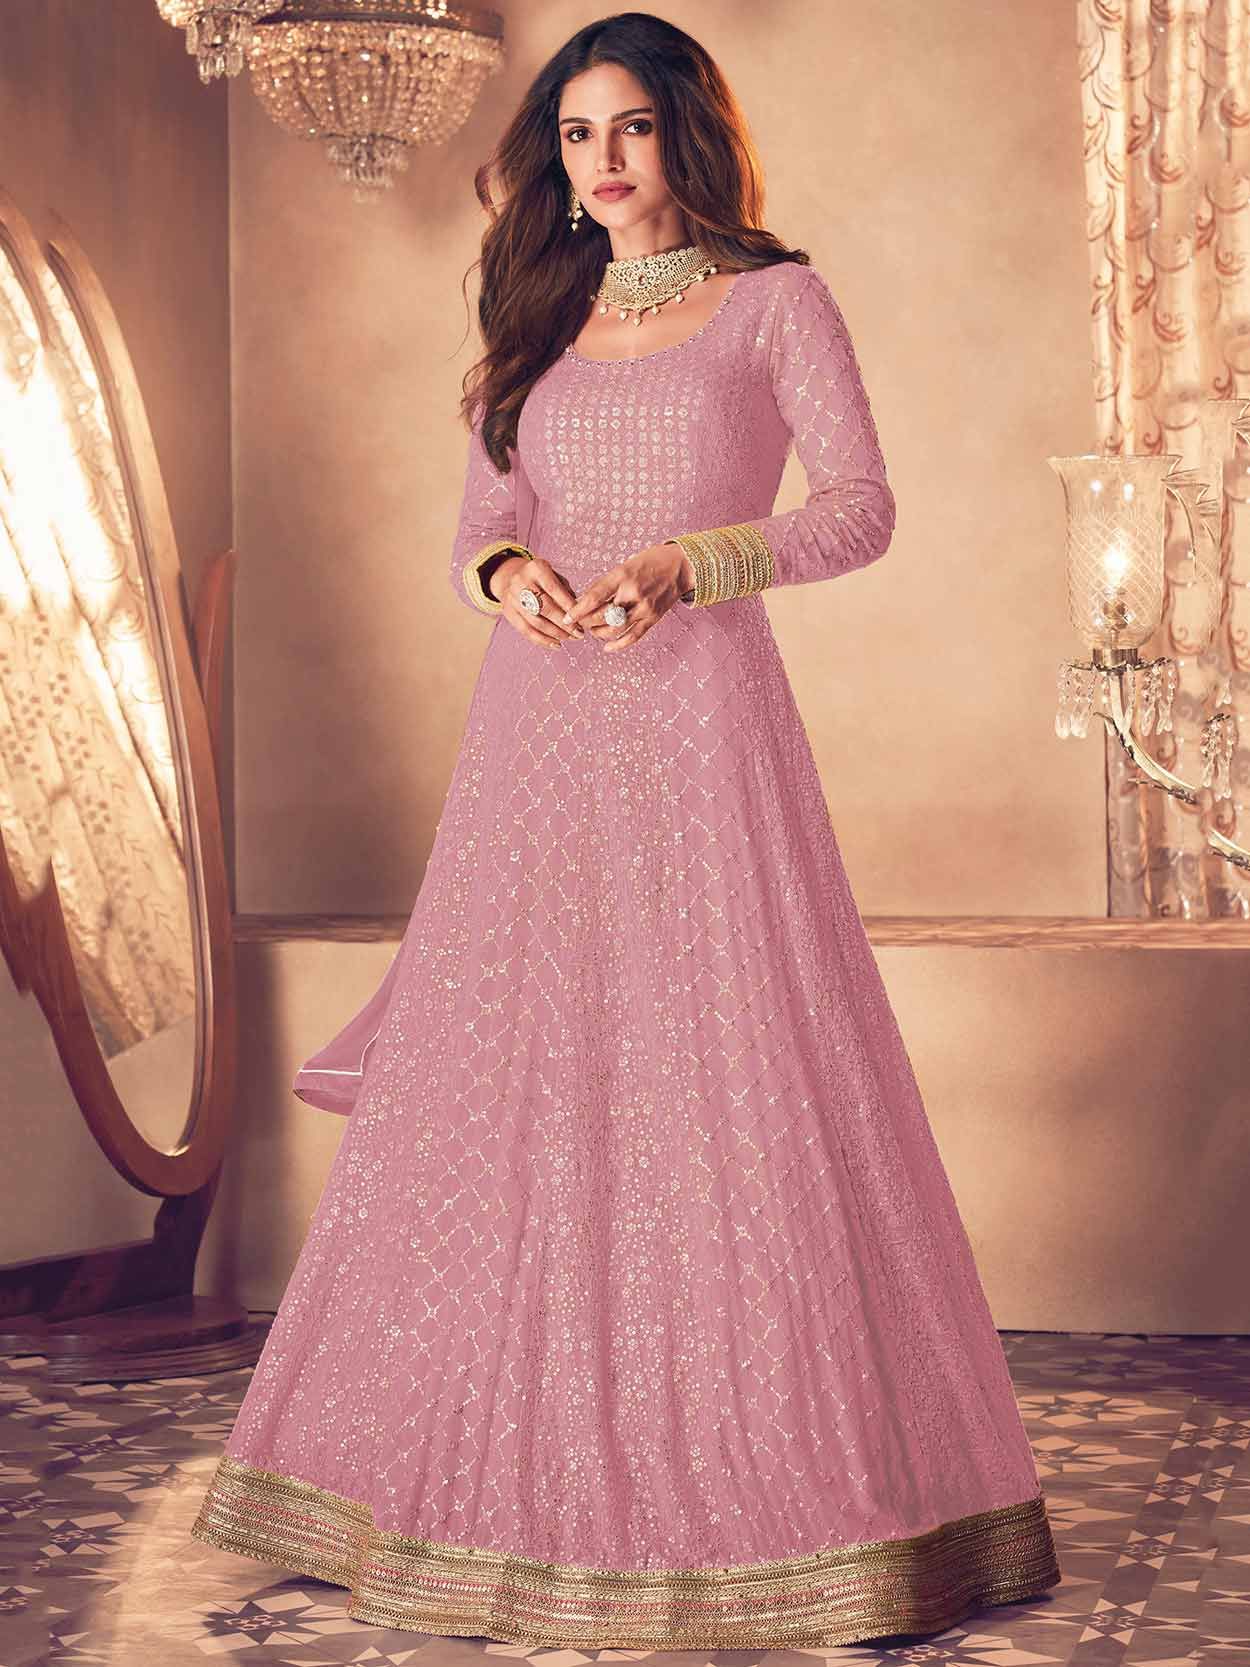 Georgette Rani Pink Straight Salwar Suit - KREATAGHNA COLLECTION - 4018155